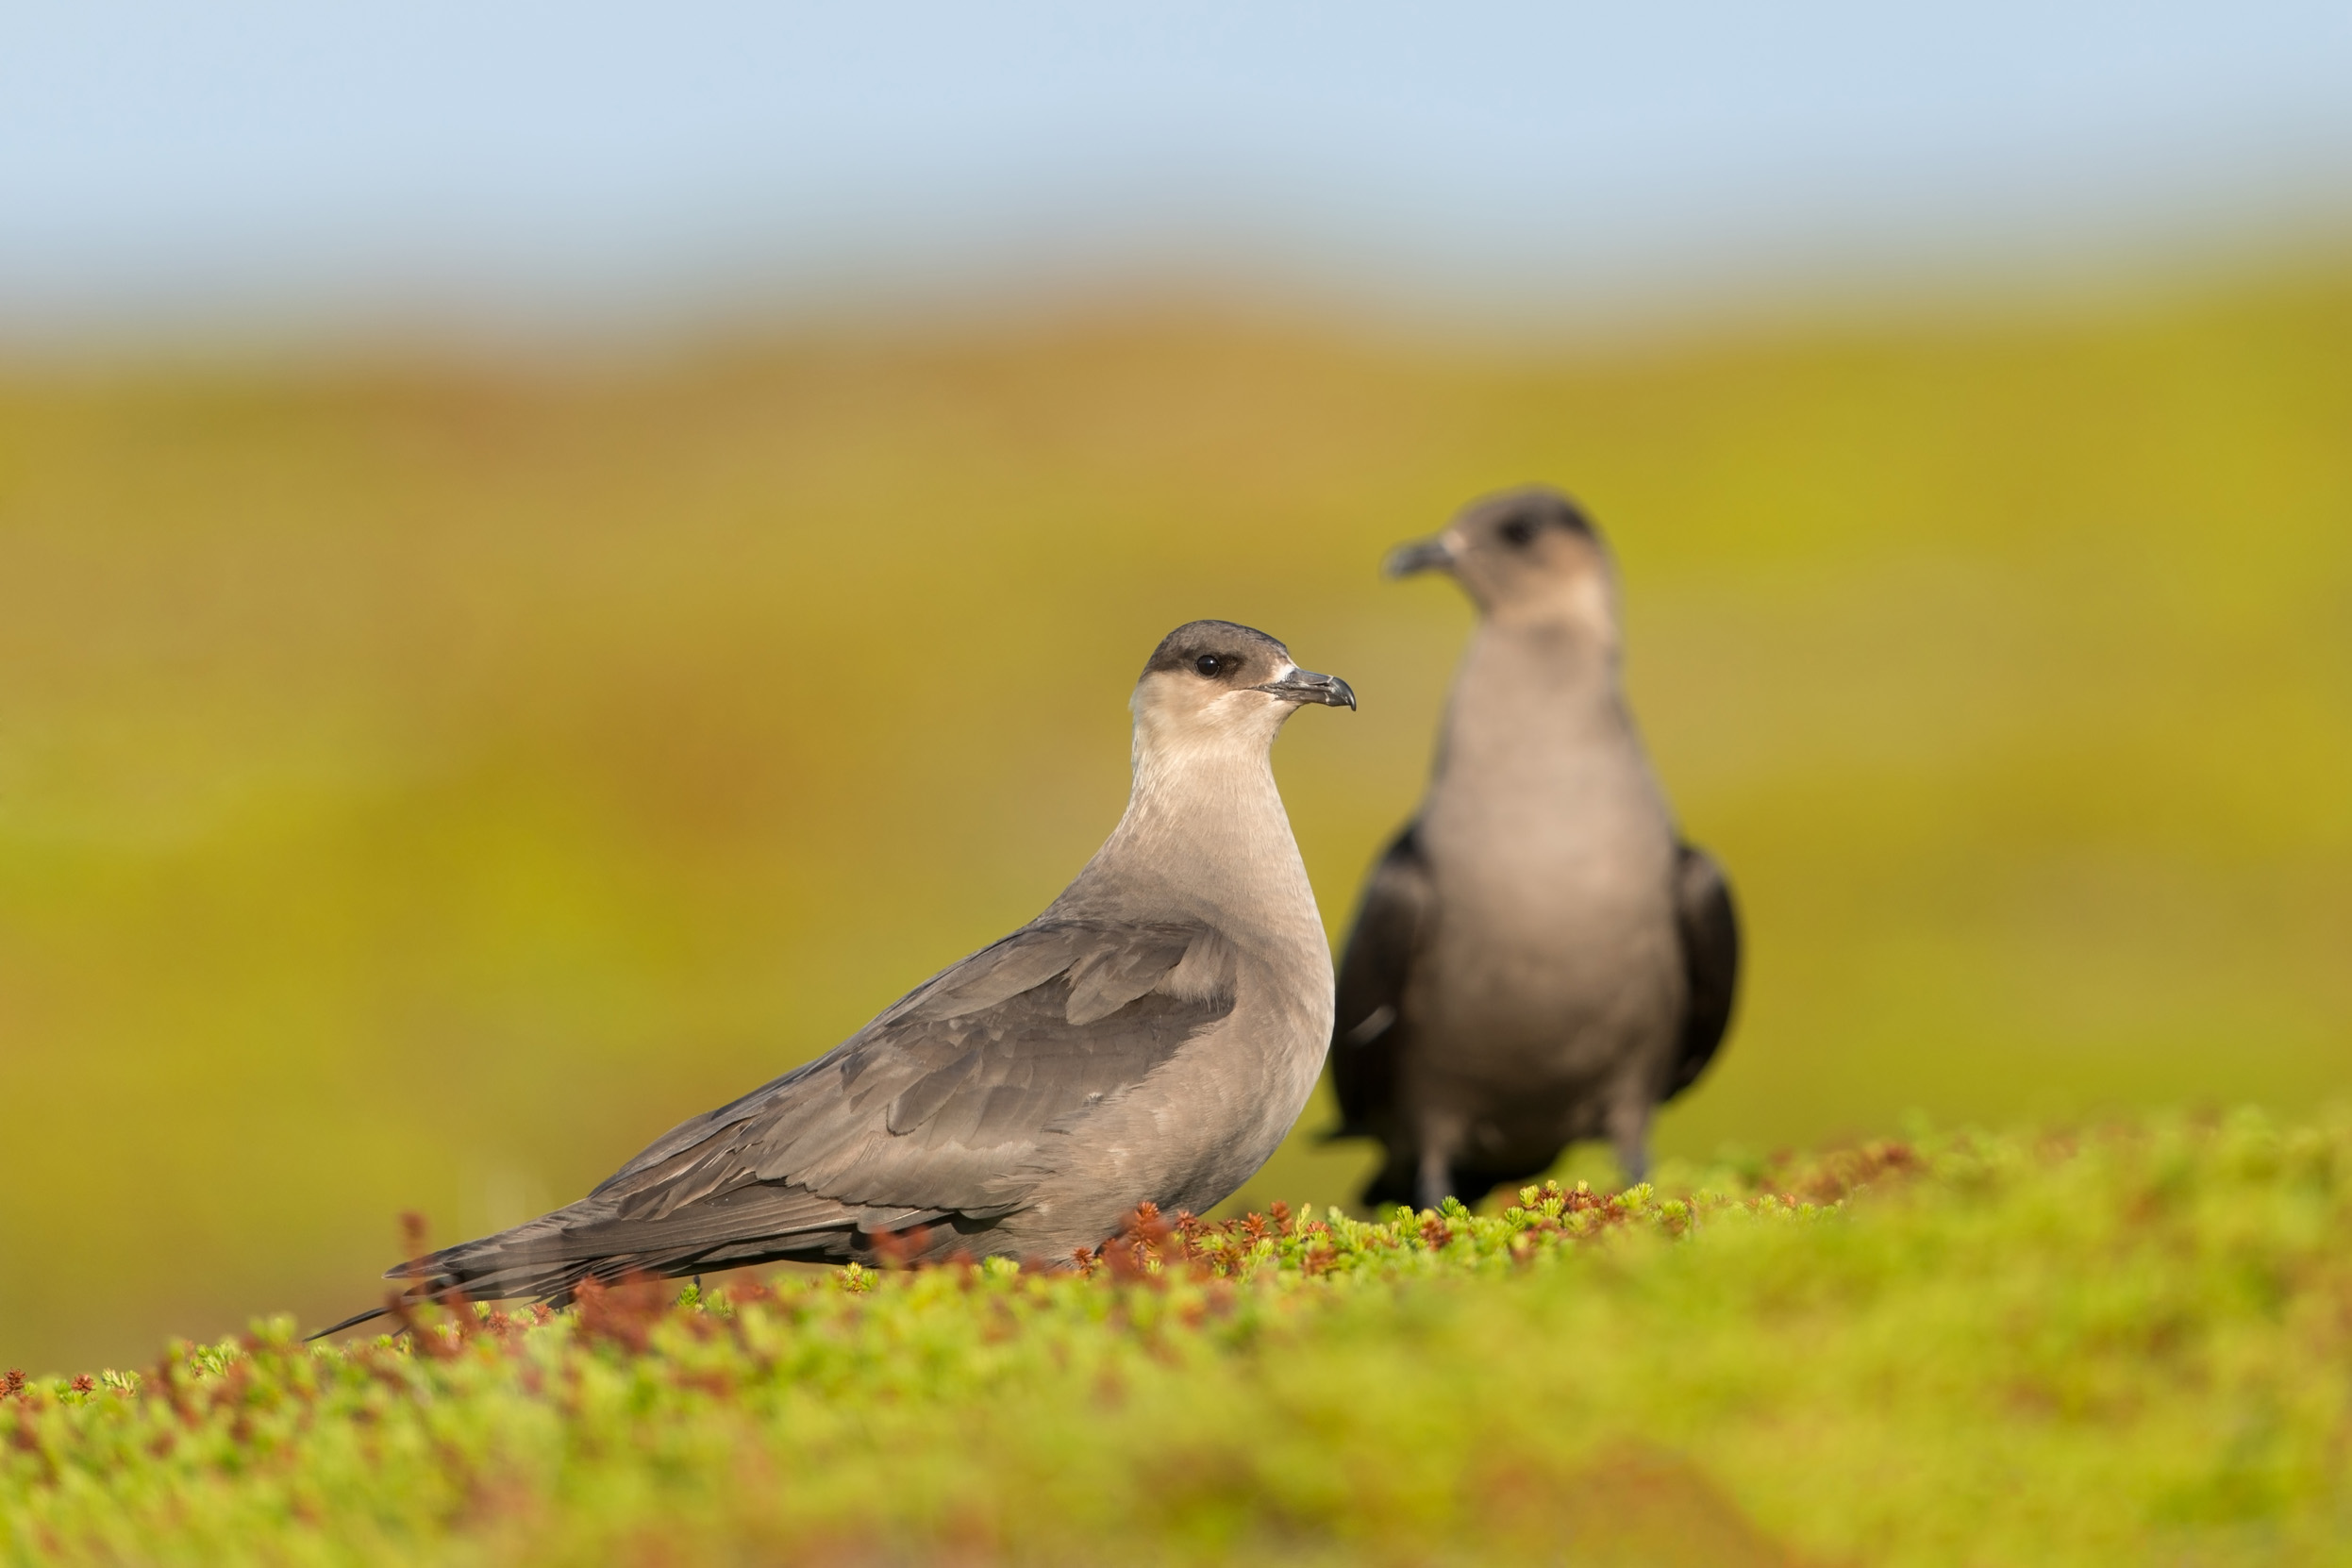 Two Arctic Skua stood together in a grassy field.